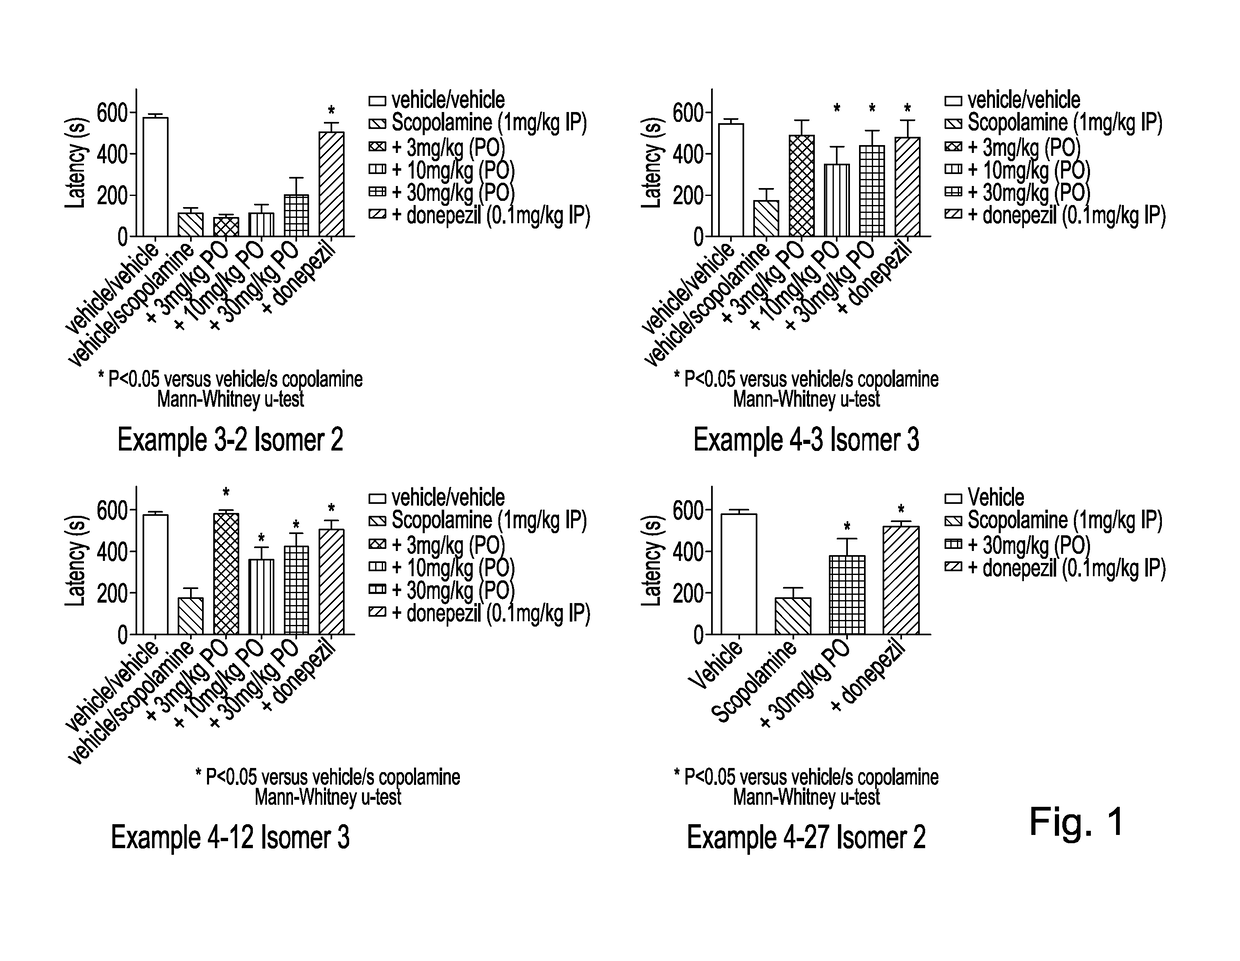 Spirocyclic compounds as agonists of the muscarinic m1 receptor and/or m4 receptor